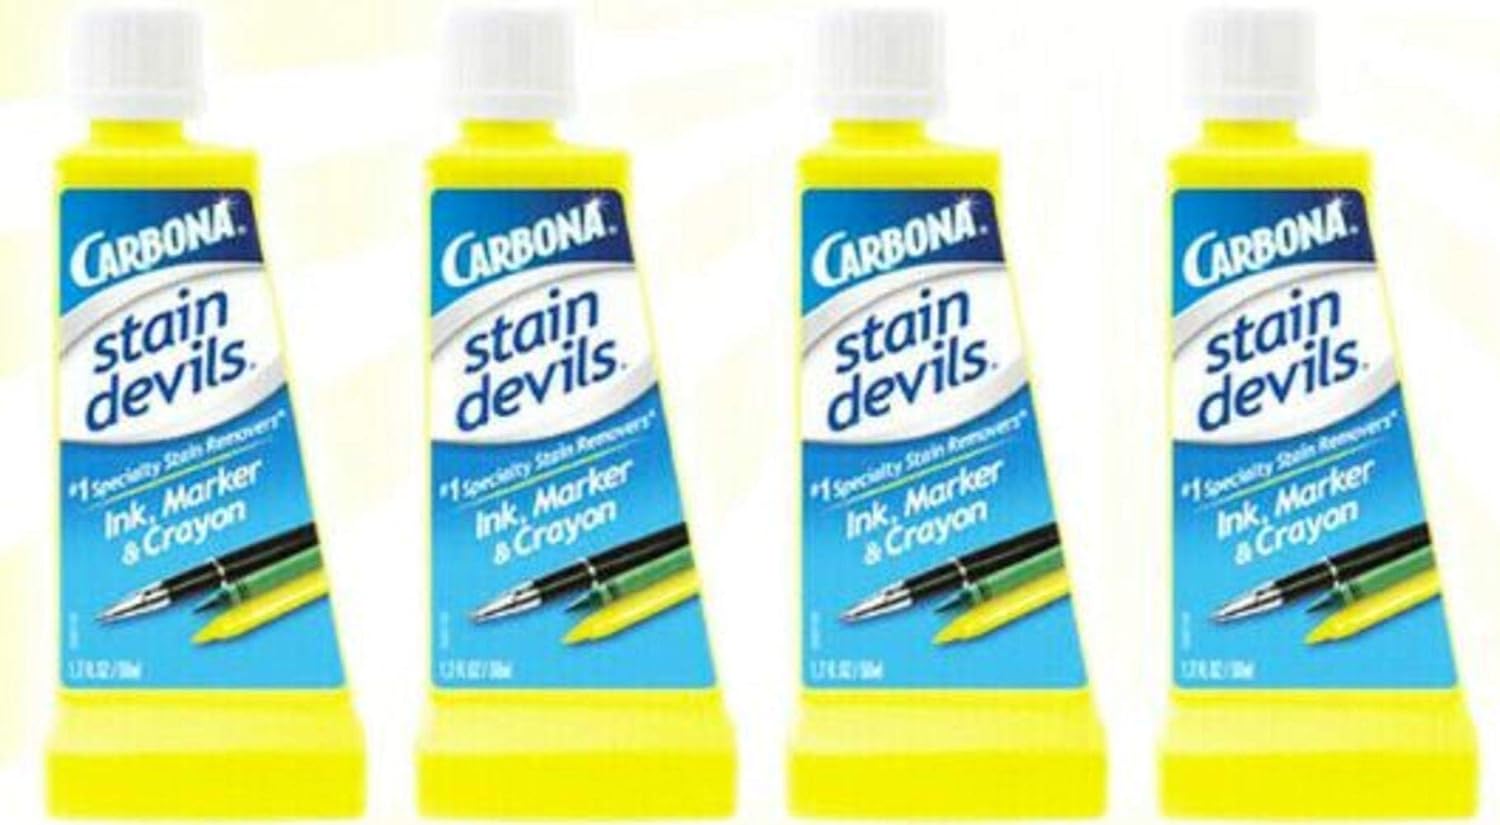 Carbona Stain Devil #3-4 Pack for Ink and Crayon Stains : Health & Household